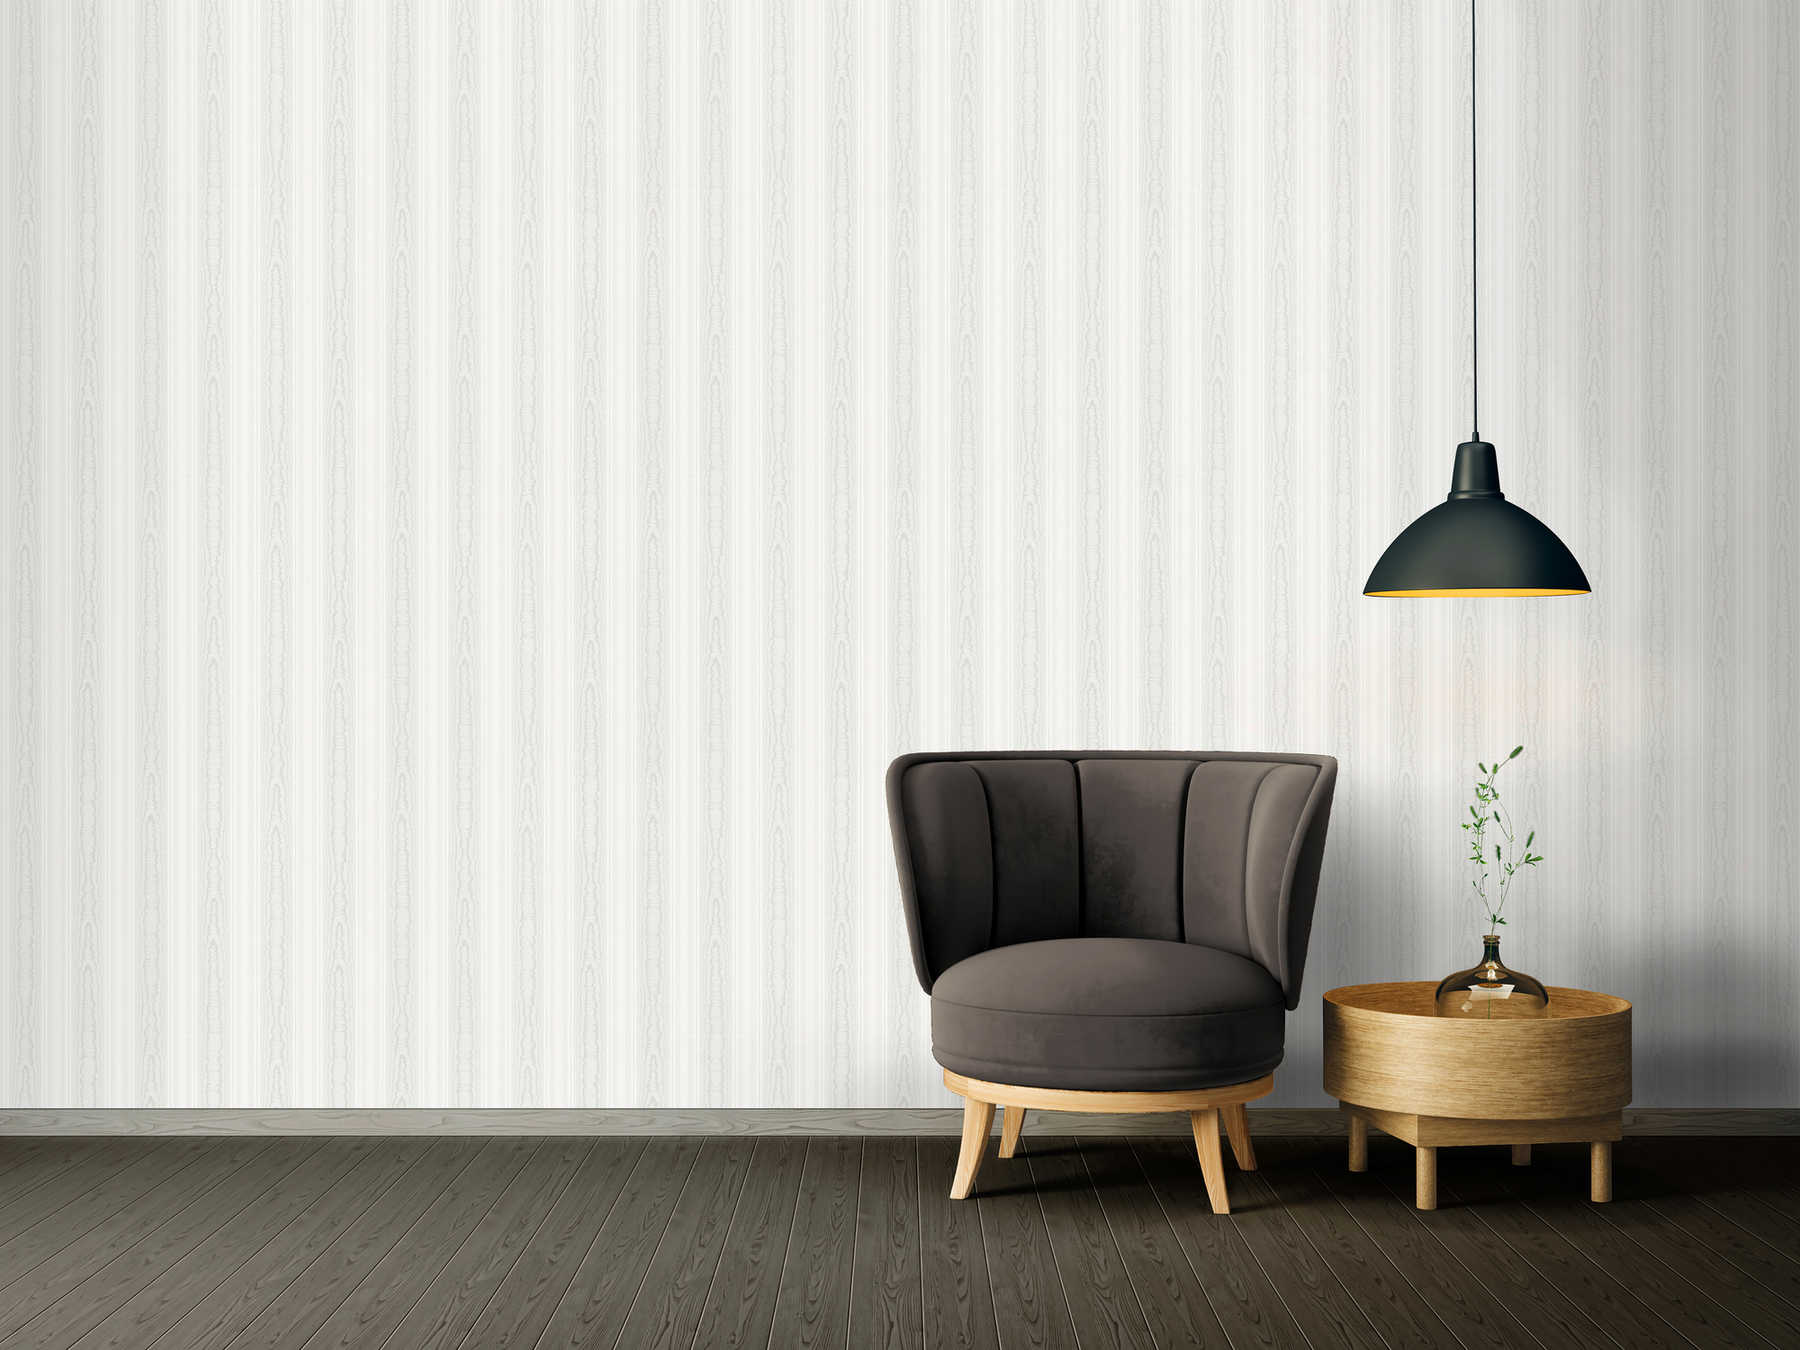             Striped wallpaper patterned with wood look - cream, white
        